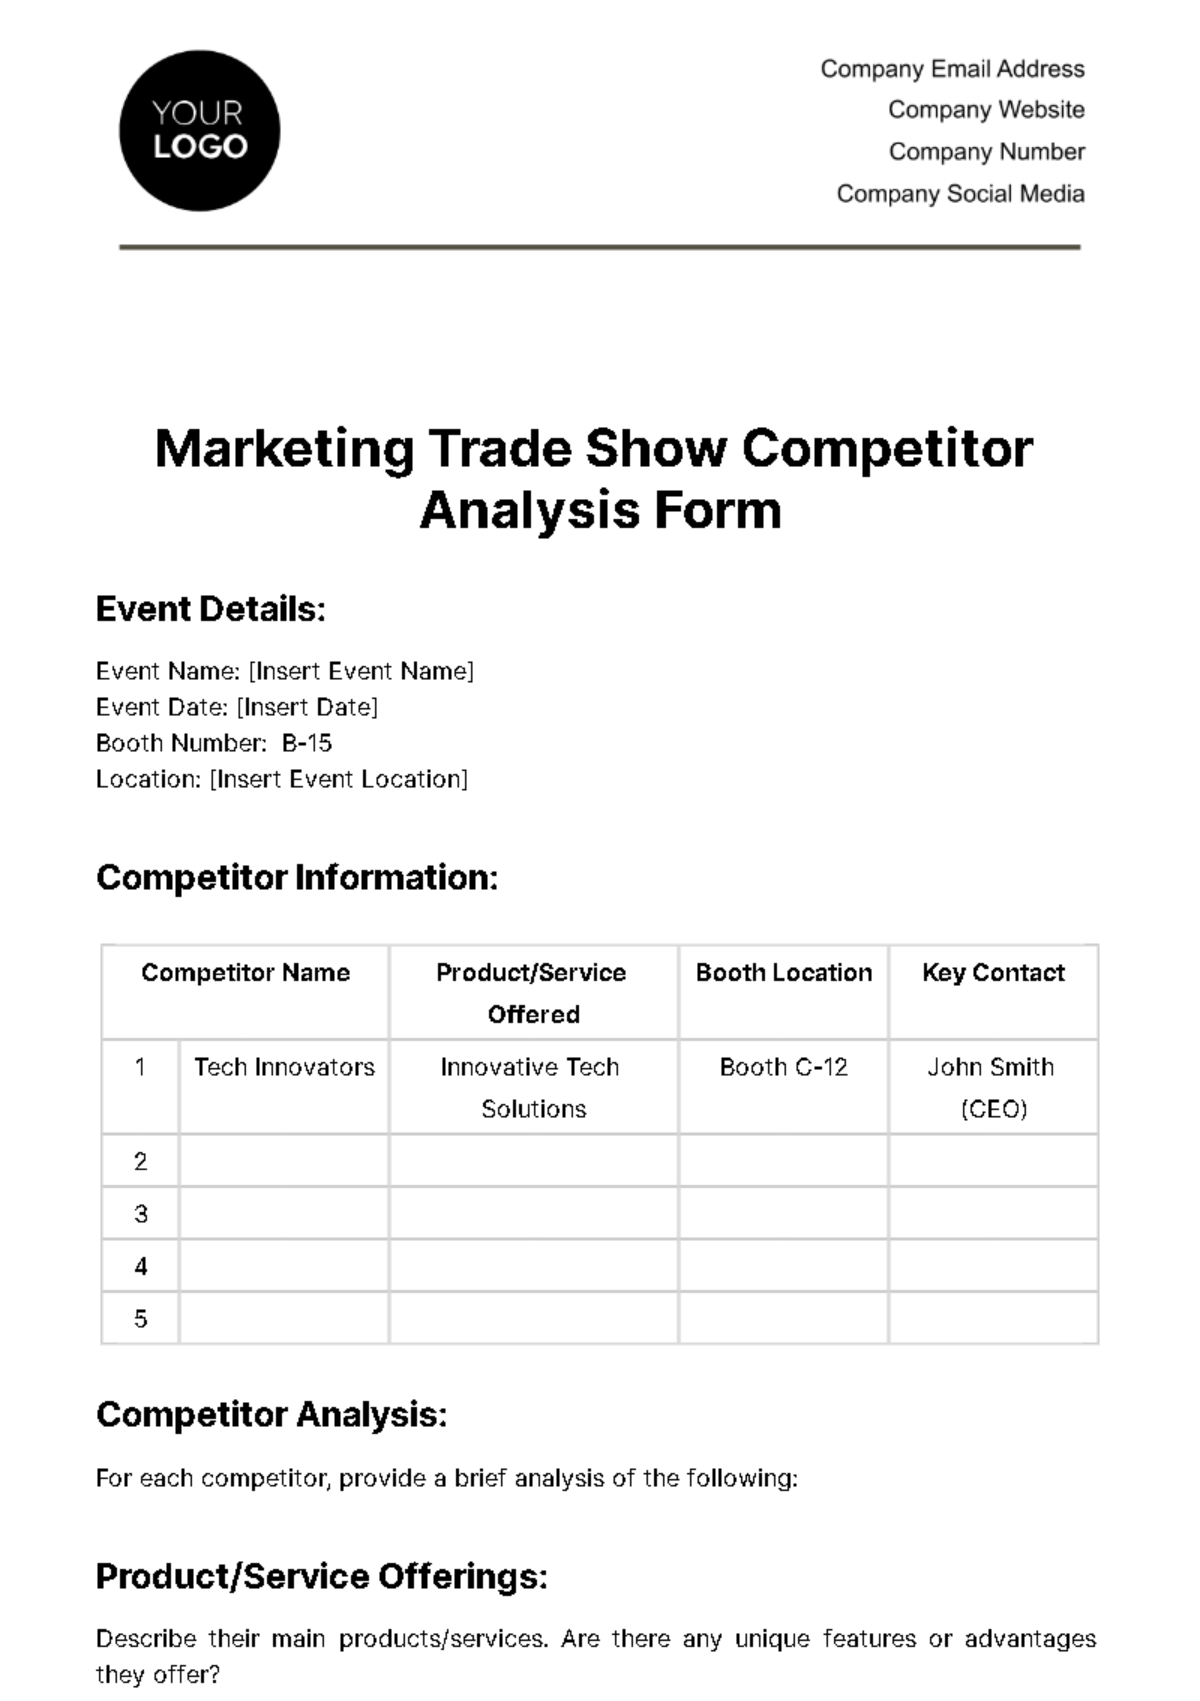 Marketing Trade Show Competitor Analysis Form Template